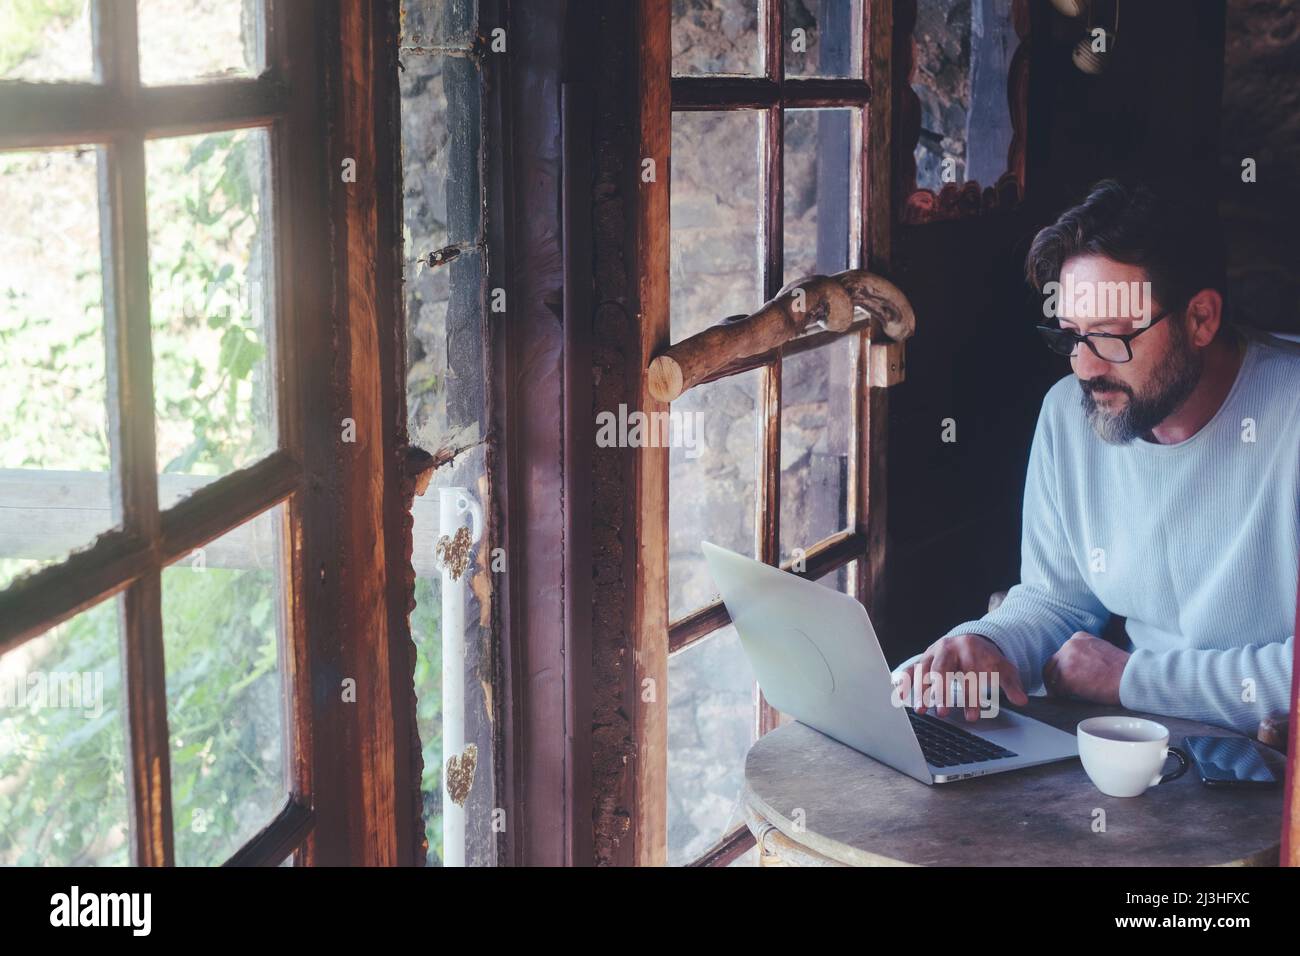 Mature man at work on laptop computer sitting at the table inside a home cozy cabin with wooden windows - digital smart working adult people concept lifestyle Stock Photo